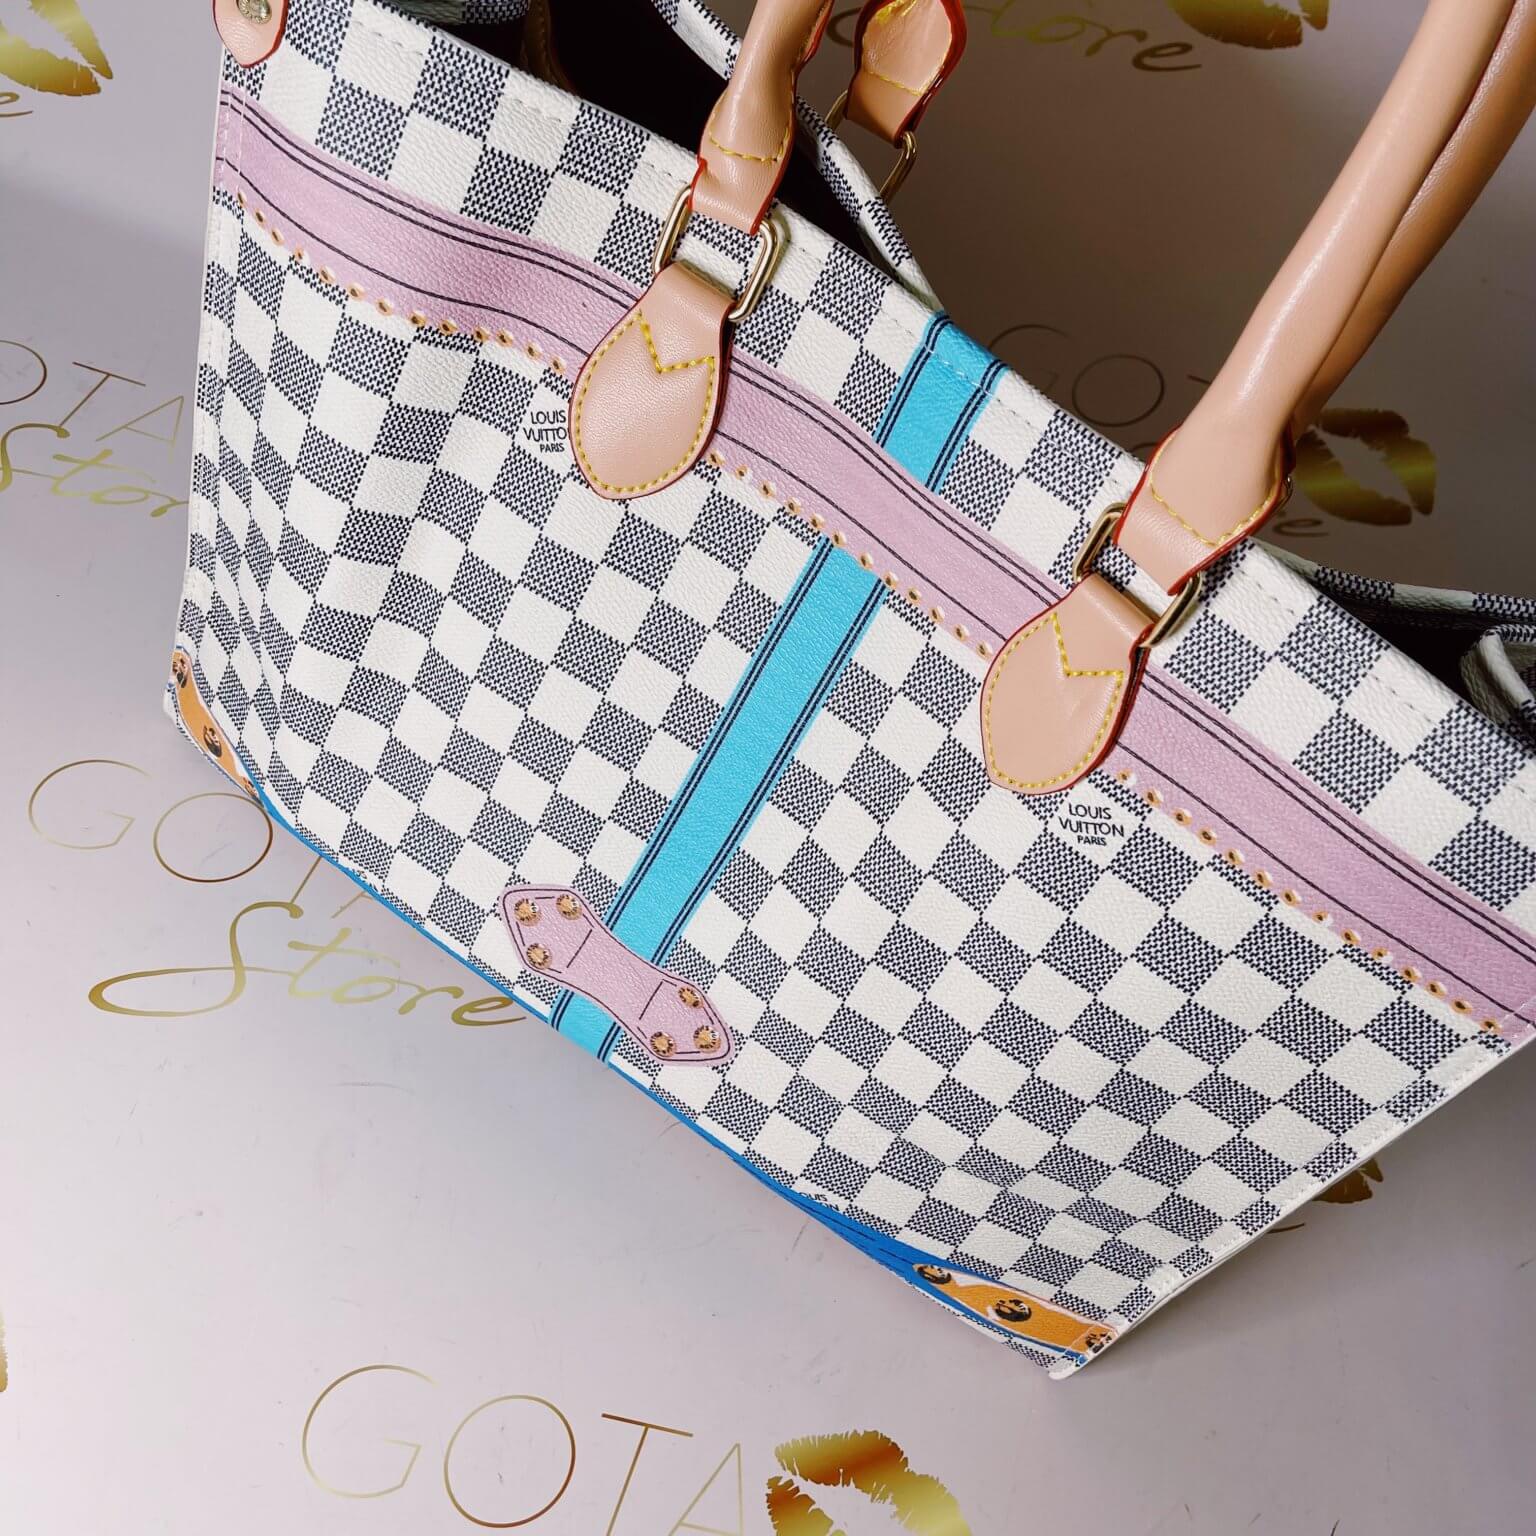 LV Propriano Damier Azur Printed Large Tote Bag - White Leather Women's ...